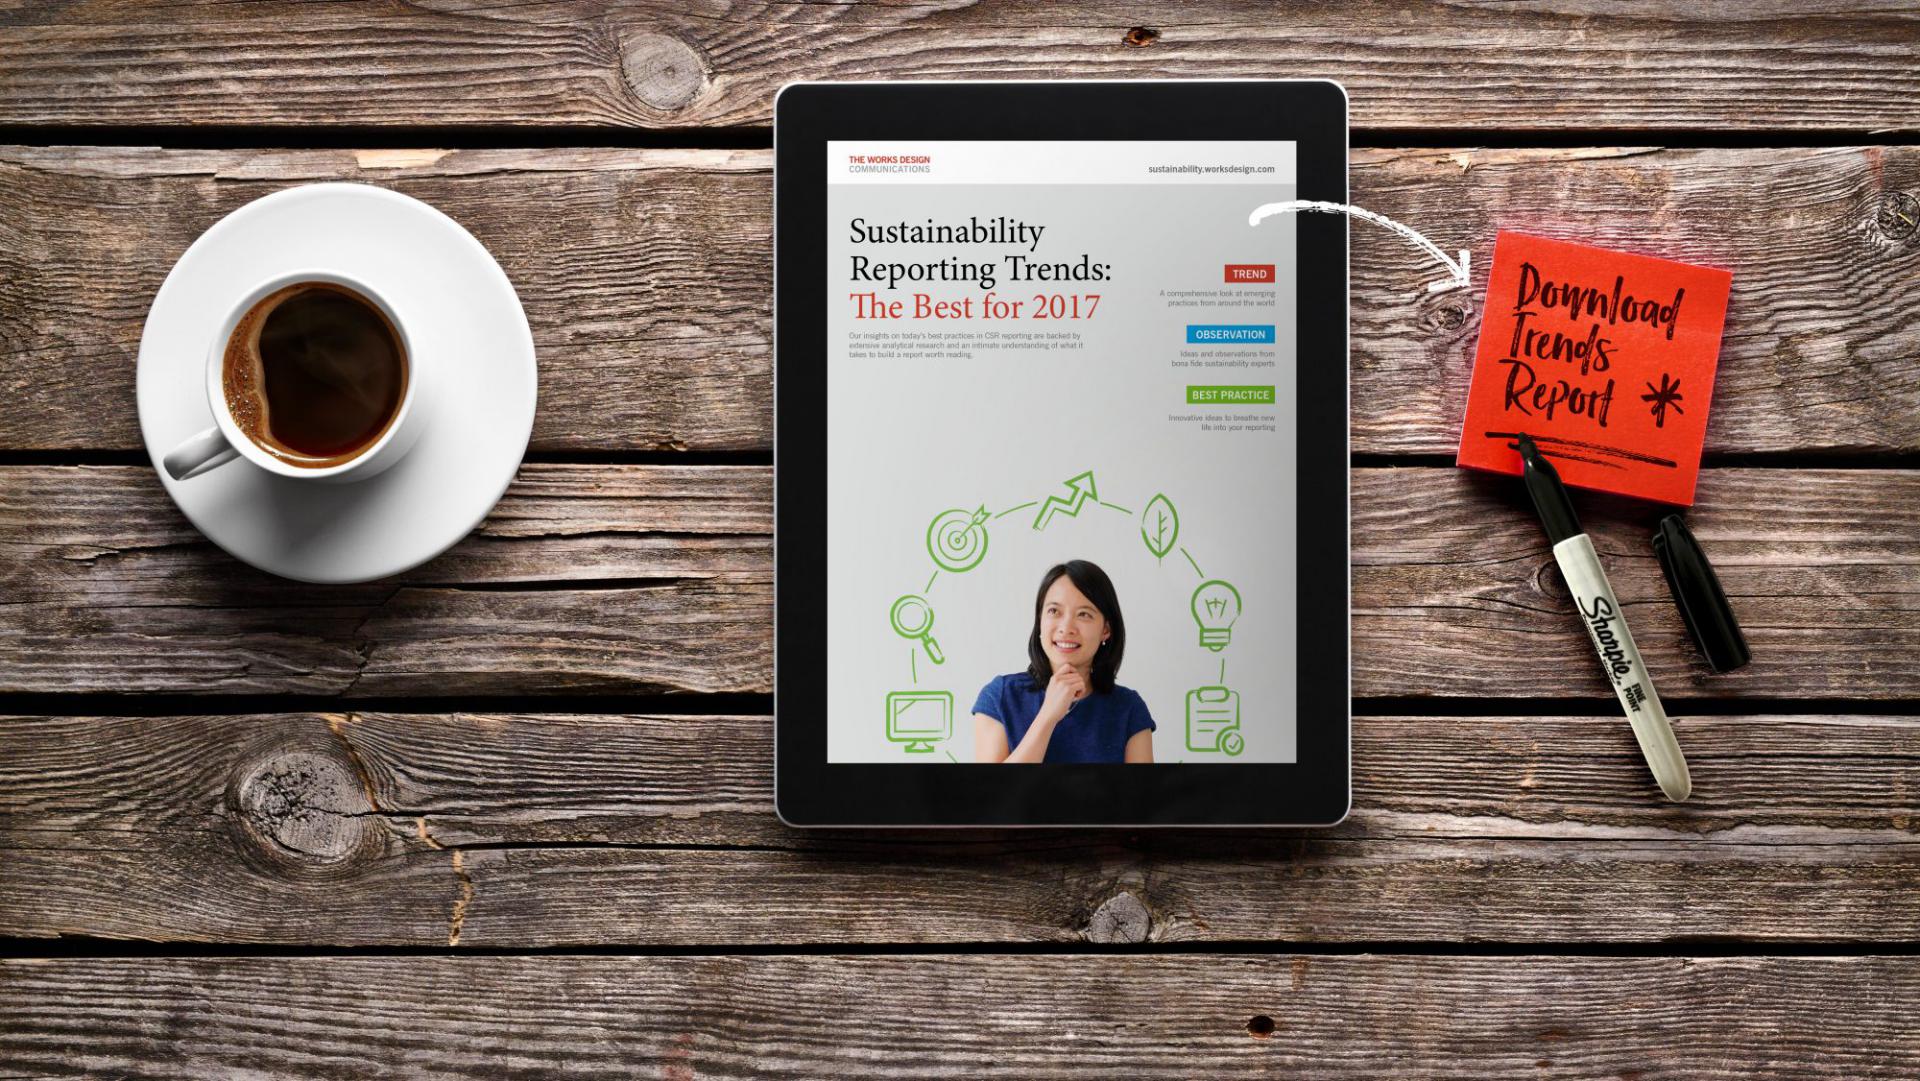 The Works' Sustainability Reporting Trends is available for download in PDF Format.